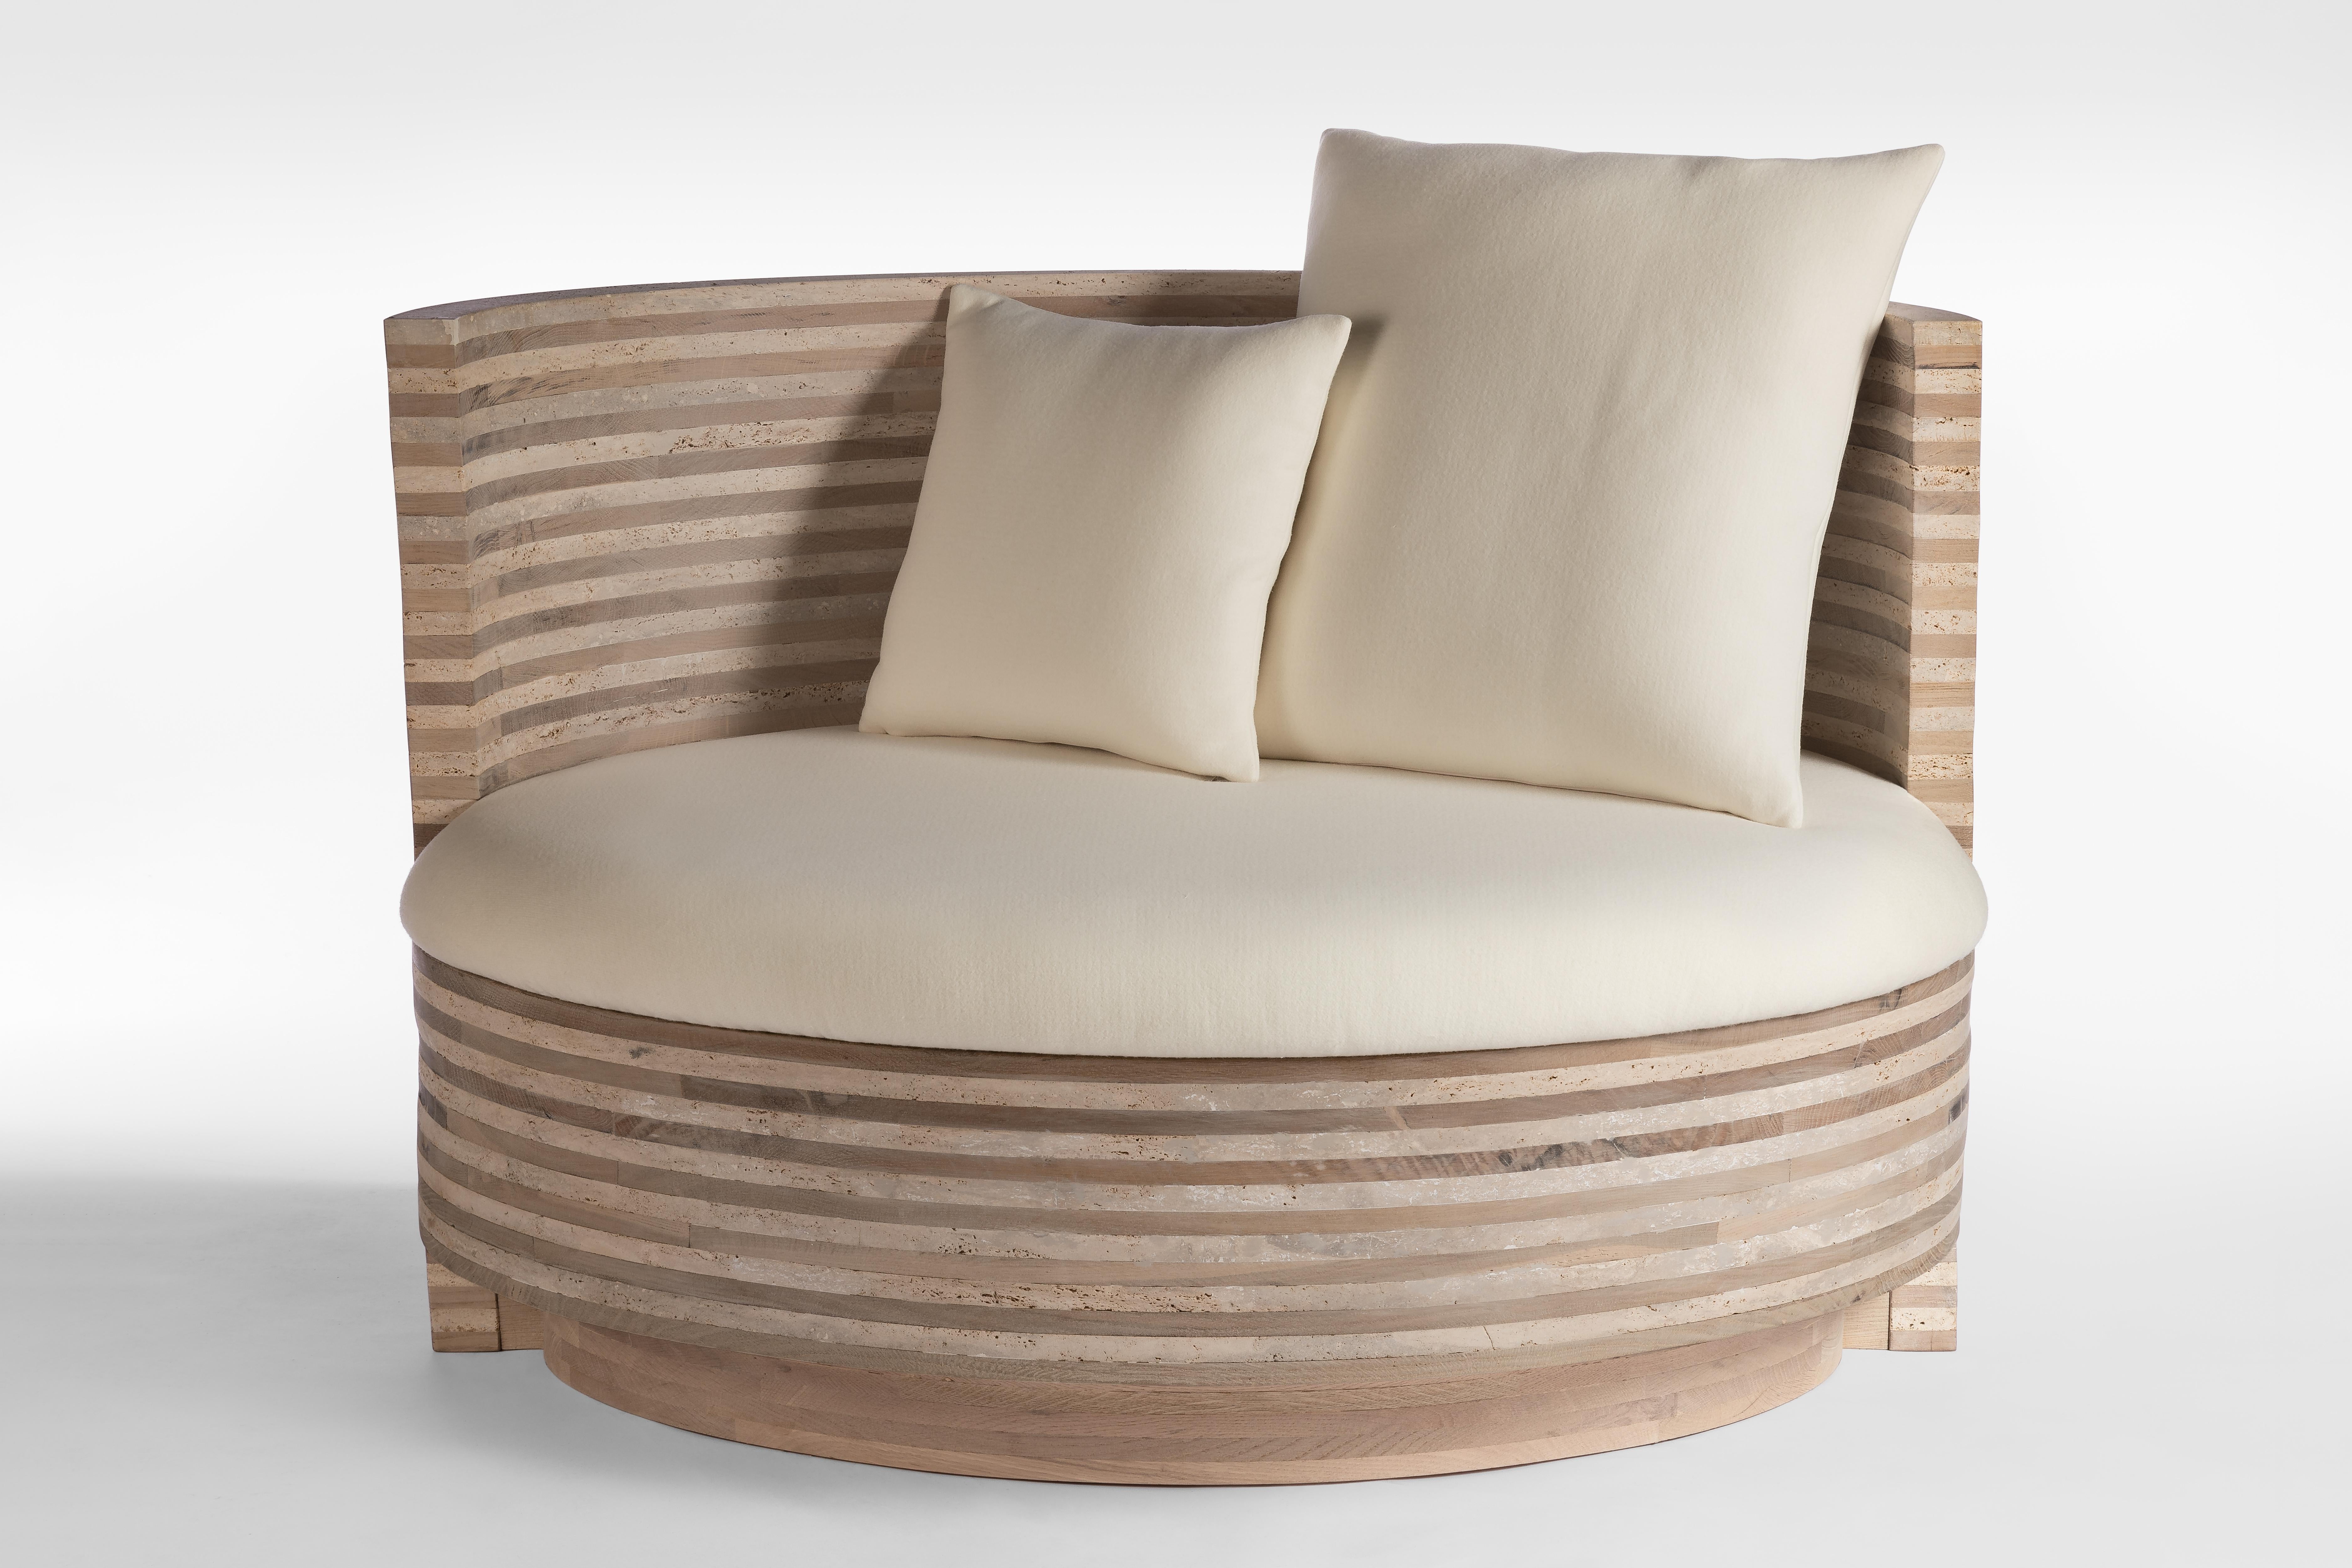 Unique Travertine on oak sofa sculpted by Francesco Perini
Materials: Oak, travertine, cashmere wool blend
Dimensions: H 90 x W 132 x D 97 cm

Following a creative path that grew out of the founding of a company, I Vassalletti, known the world